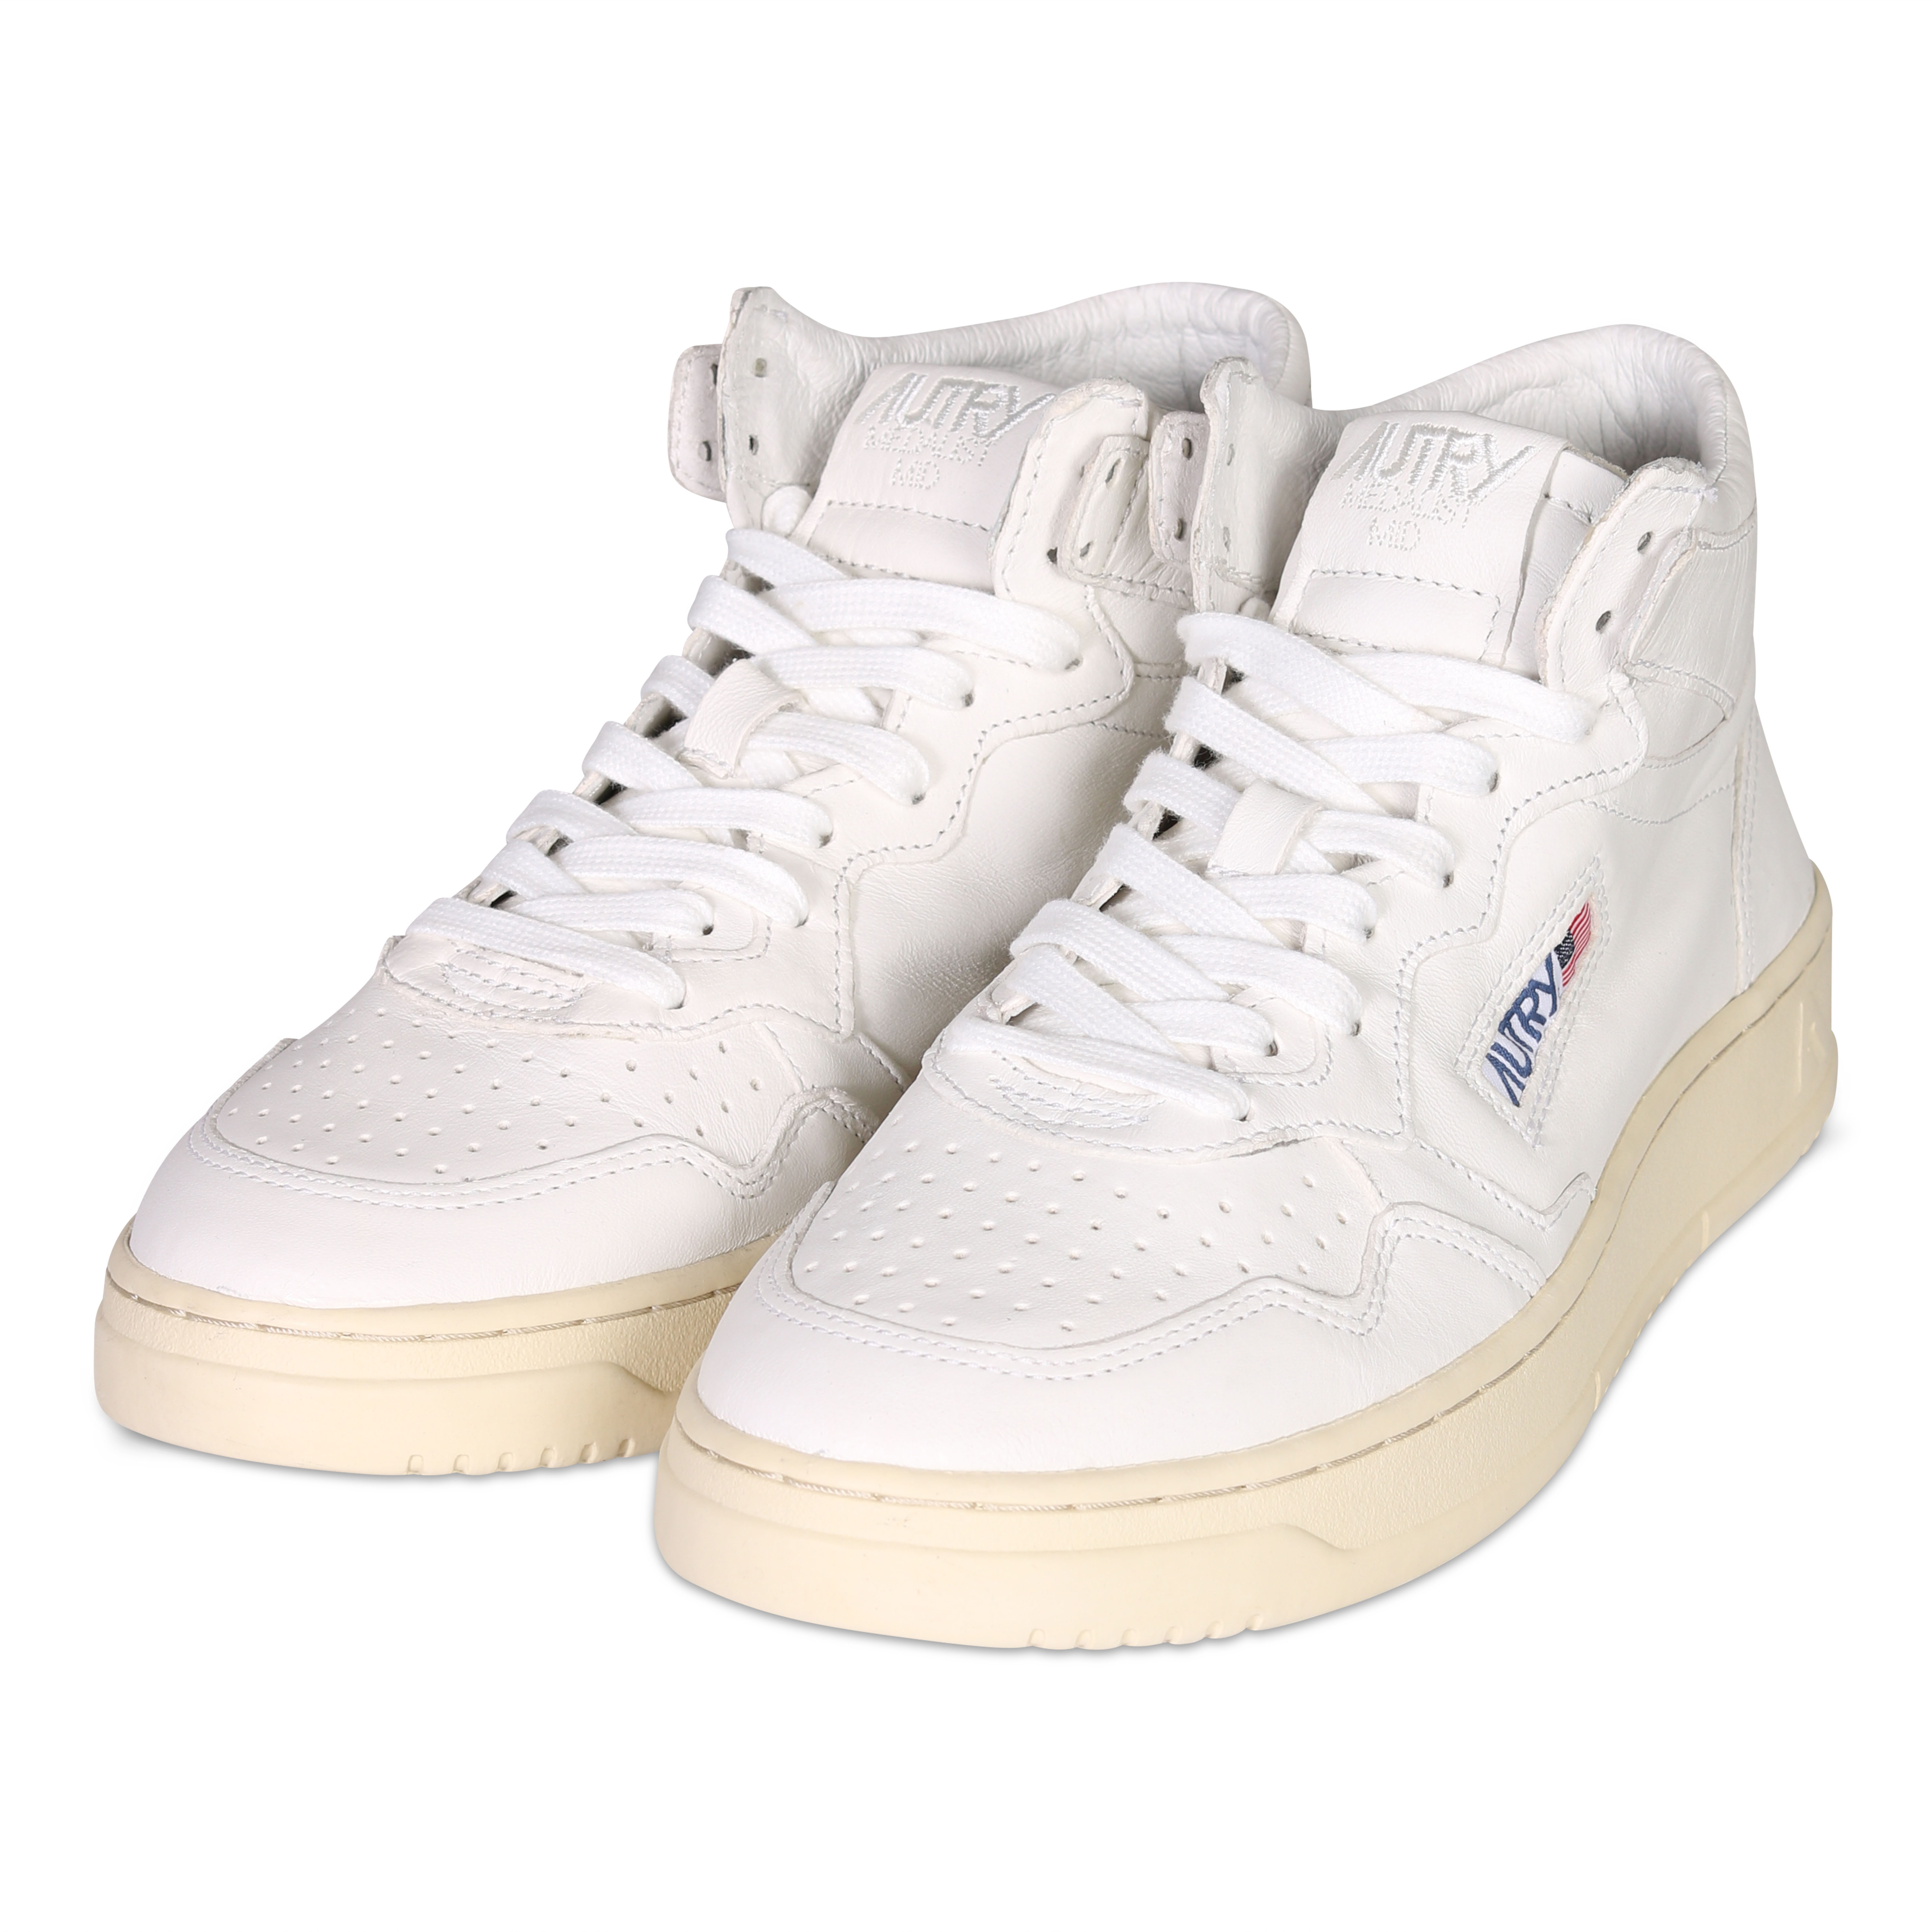 Autry Action Shoes Mid Sneaker Goat White/White